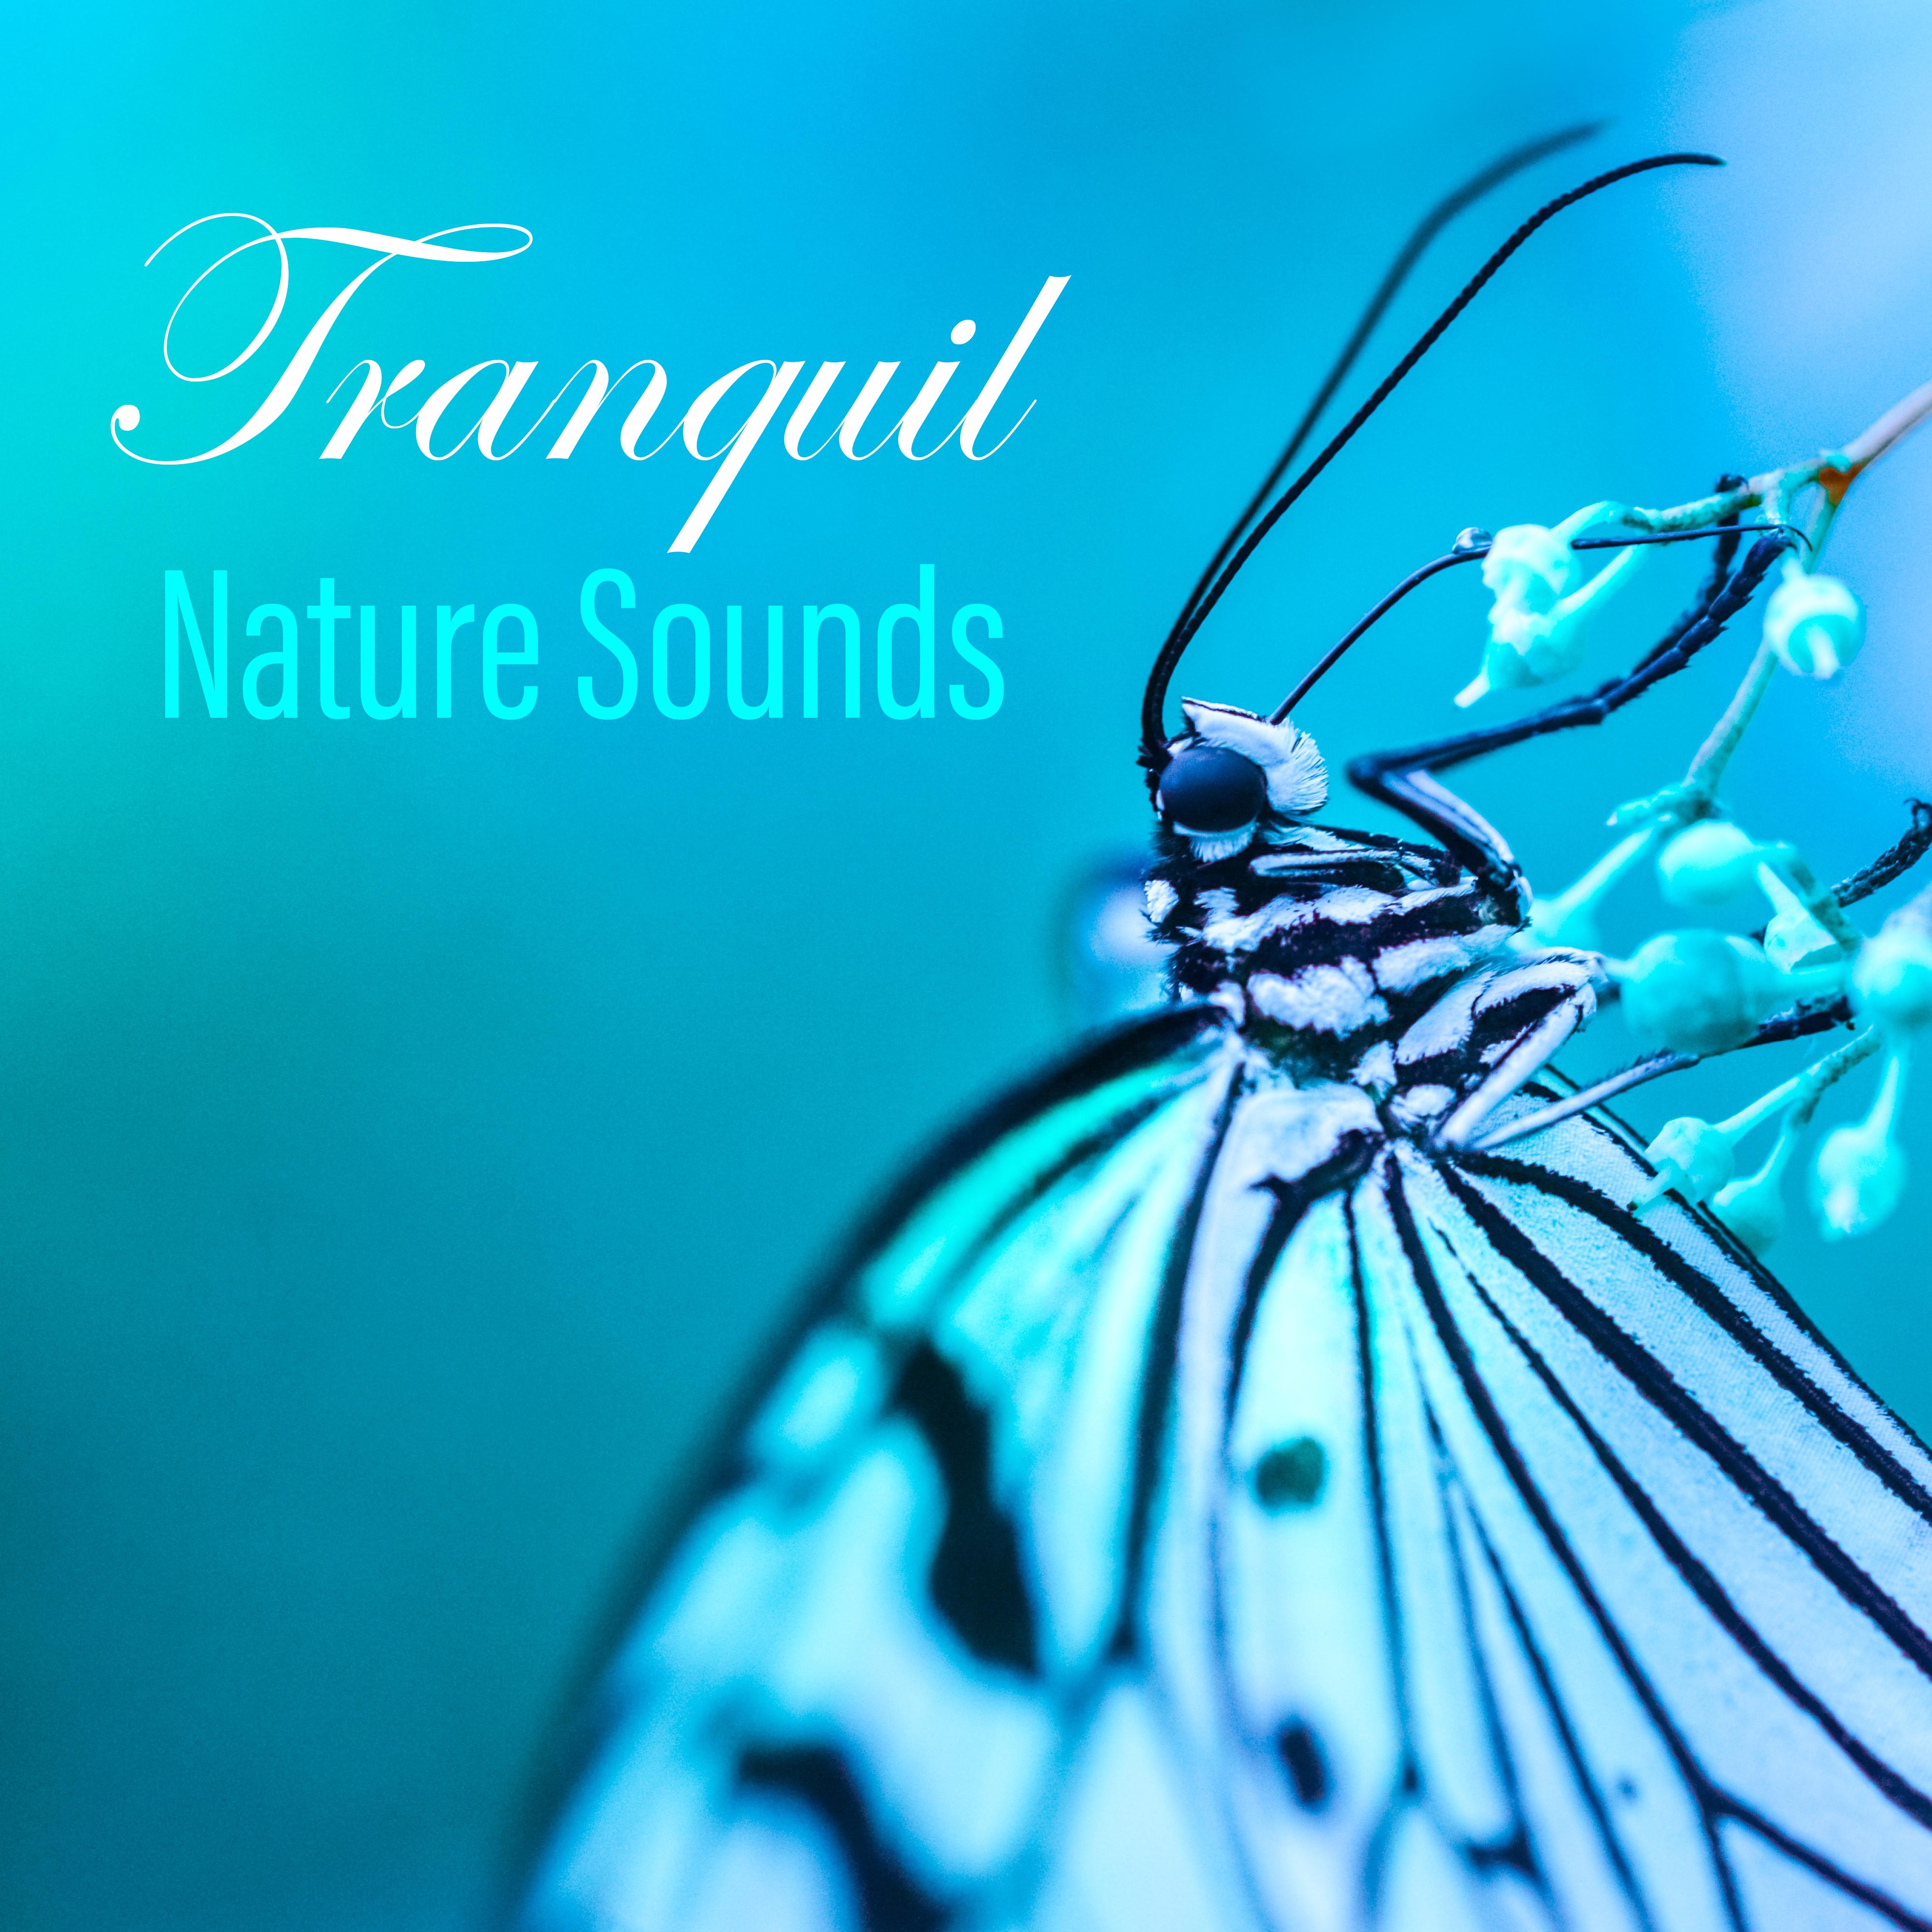 Tranquil Nature Sounds